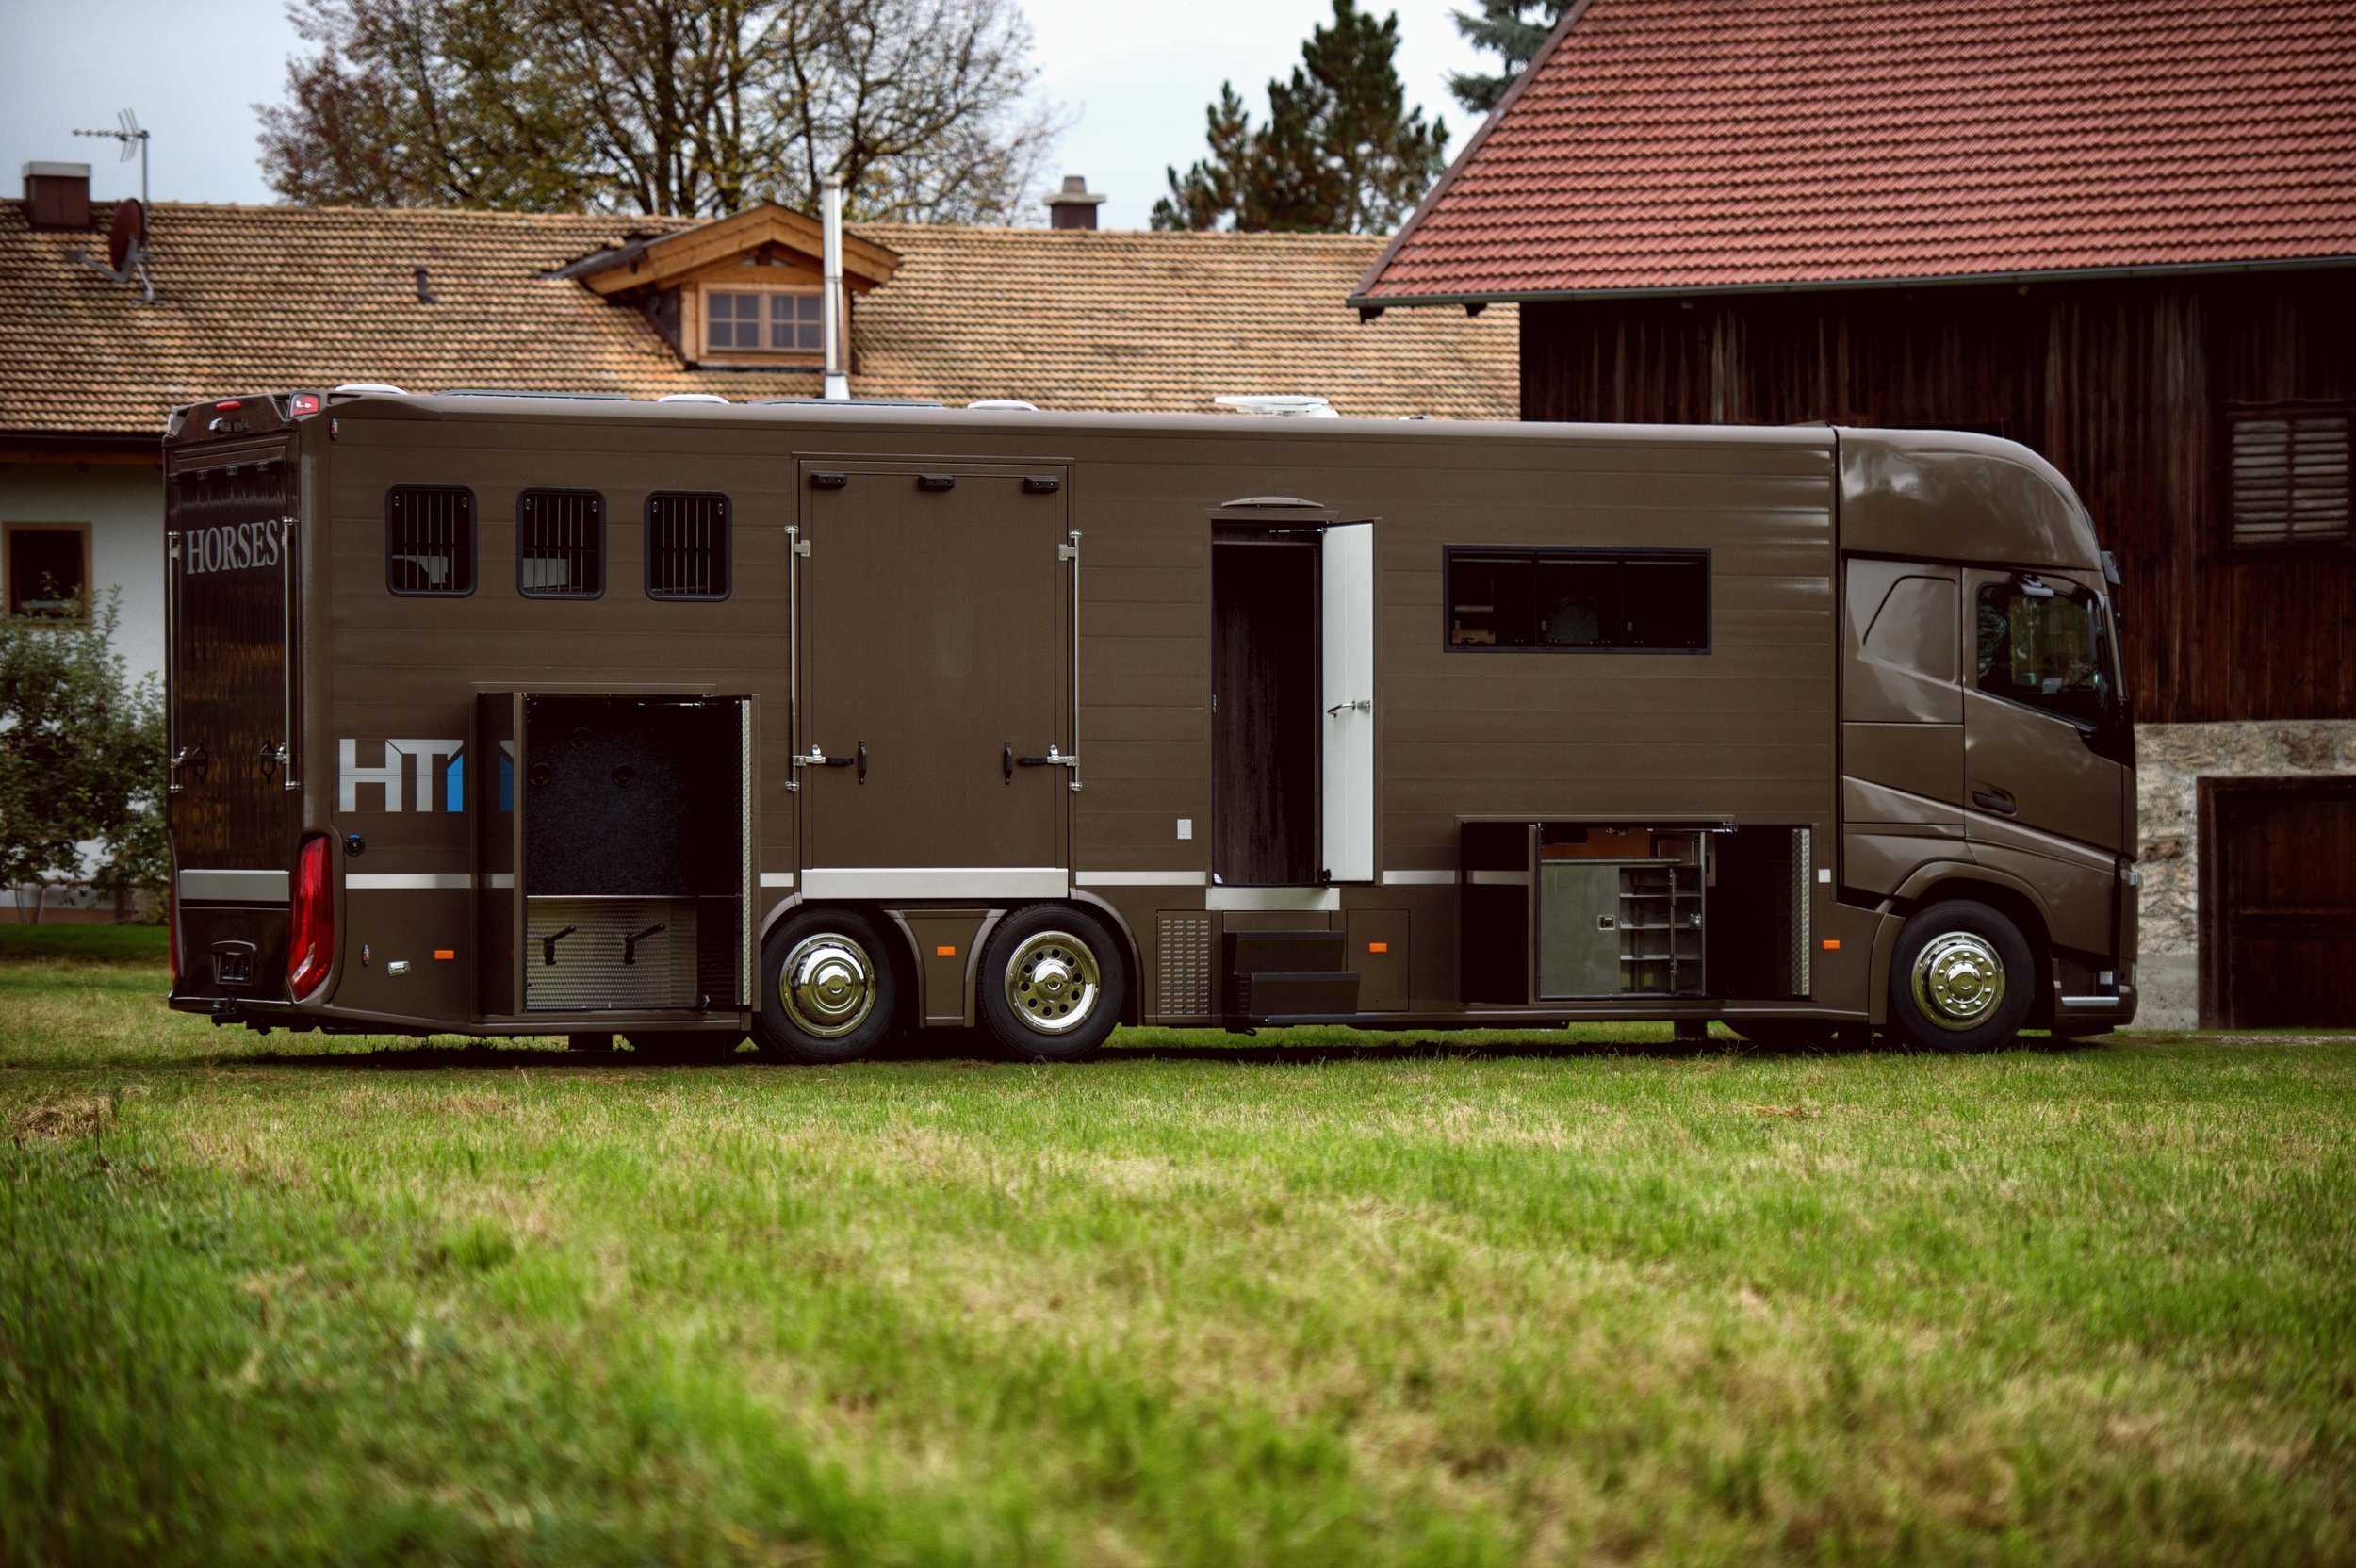 Horse Truck Pop out Volvo Aniko Towers Photo Oct17-61.jpg